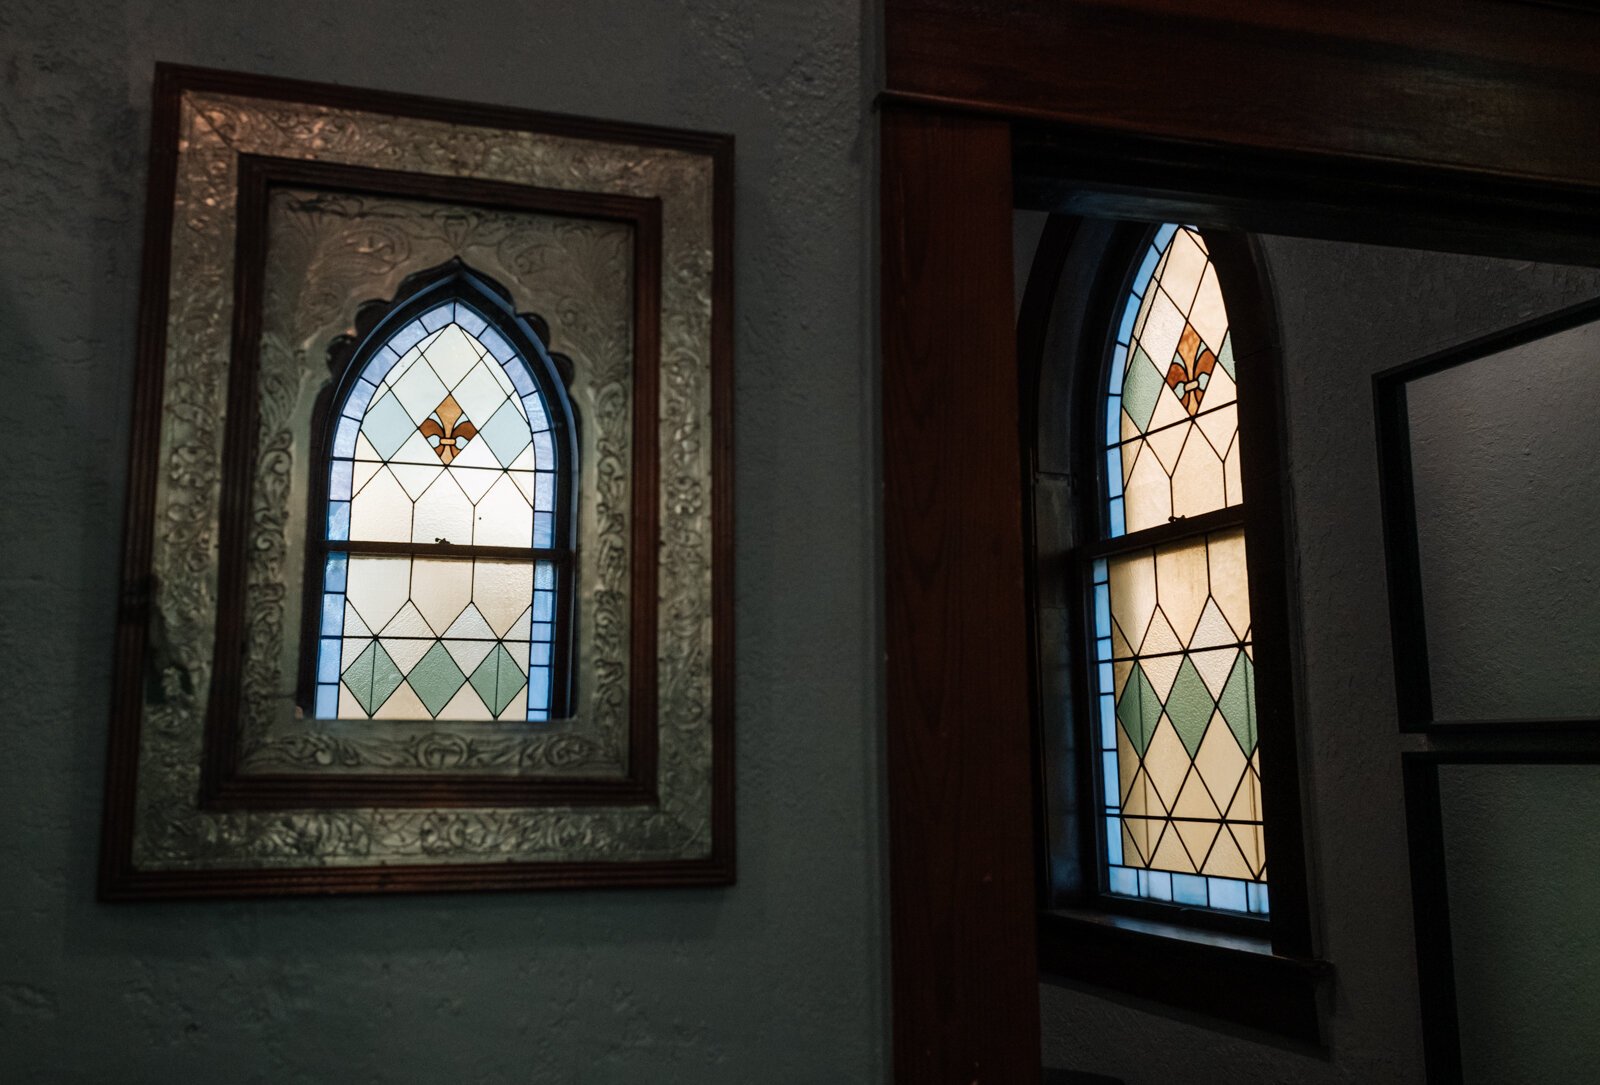 Stained glass windows inside the master bedroom "Intimate Hub" at the Sanctuary.